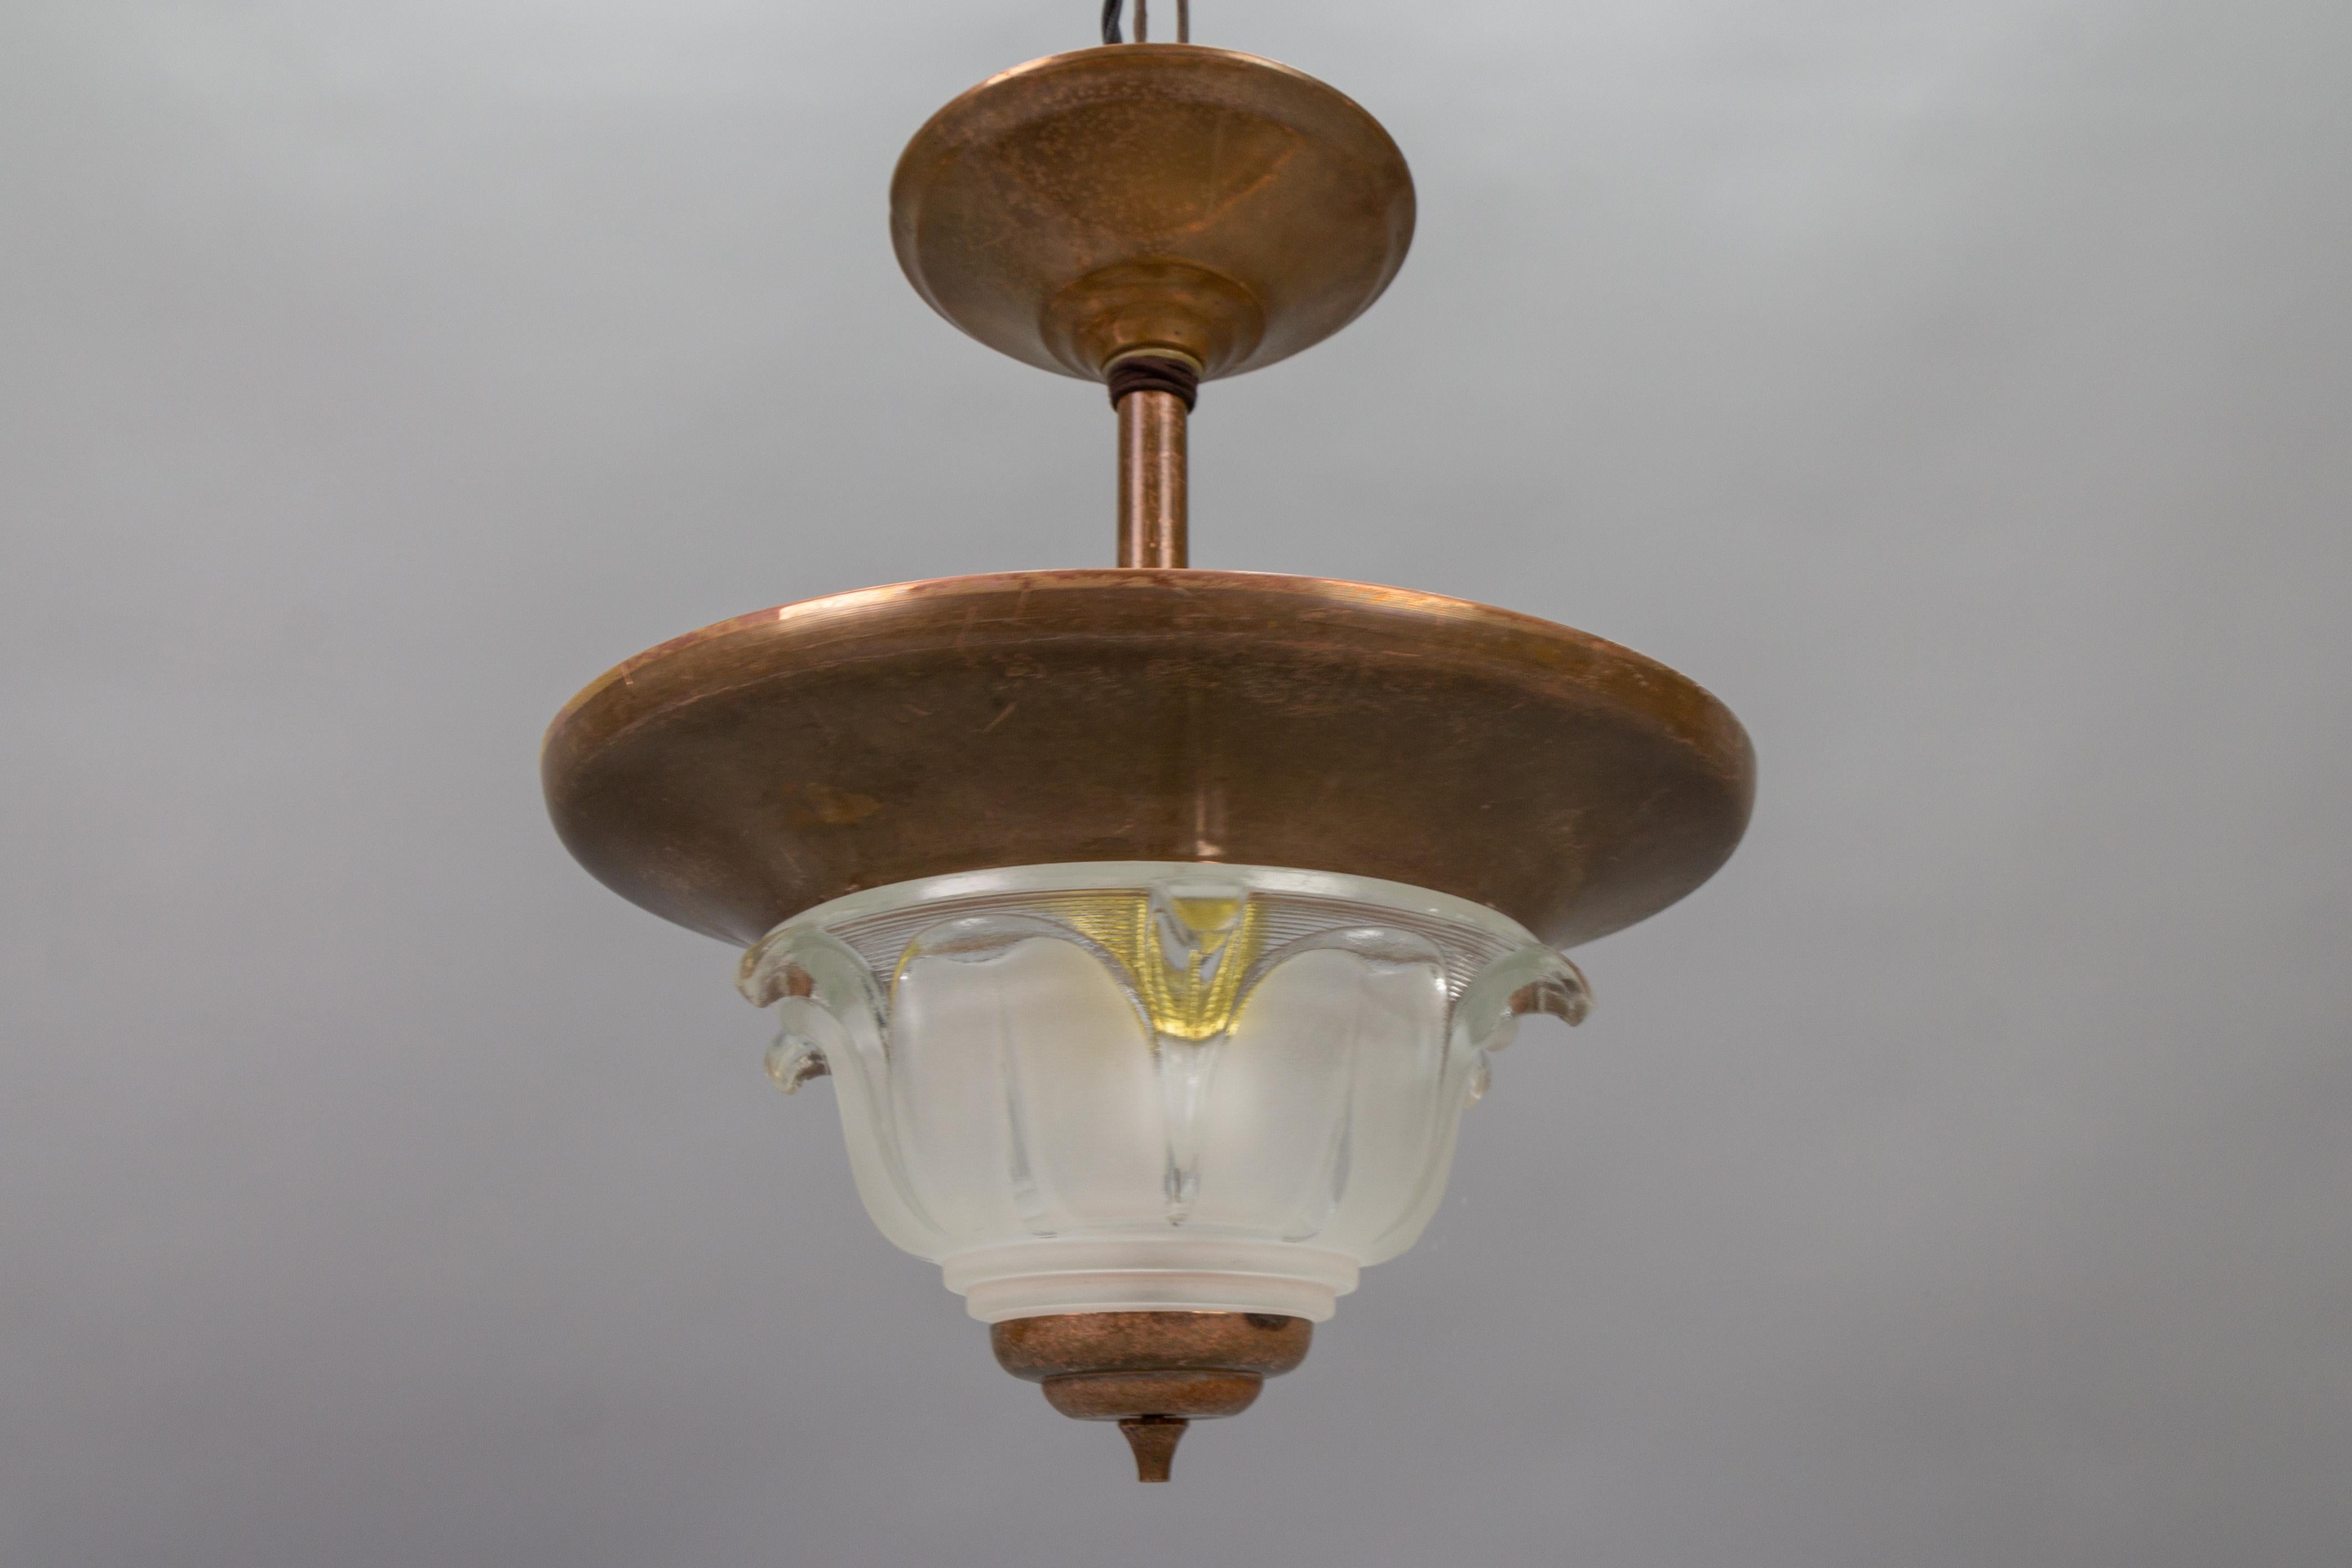 French Art Deco copper and frosted glass pendant light, from circa the 1930s.
Adorable Art Deco two-light ceiling light with copper and metal lamp body and both - white frosted and clear - glass lampshade in the Ezan style. Glass is not signed.
Two